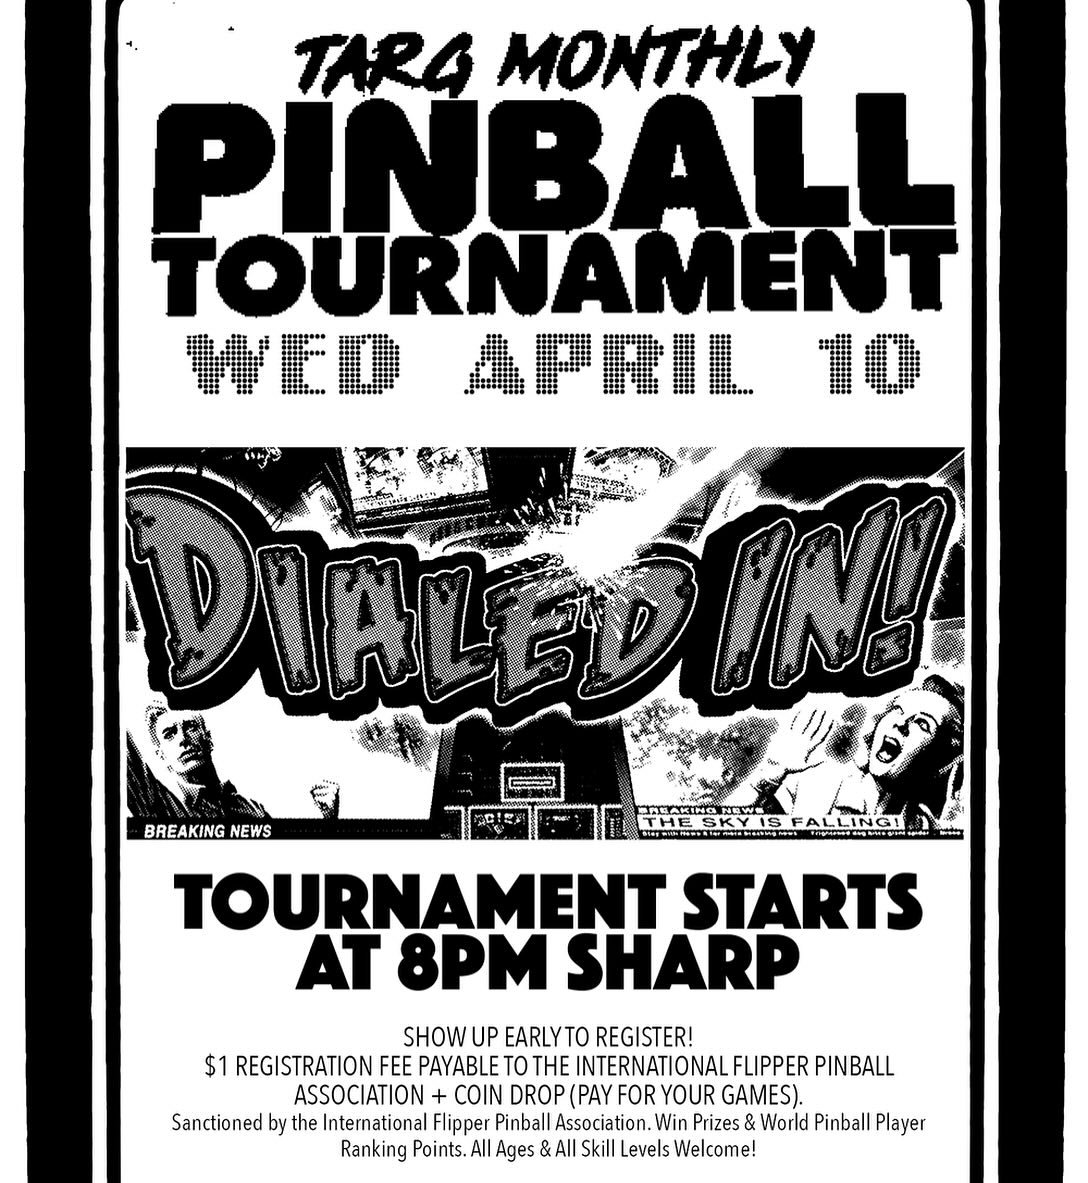 *TONIGHT!* Join us for our monthly @ottawapunkpinball #tournament - all ages and skill levels welcome - registration begins@7pm, tournament kicks off@8pm sharp!!! 🙂👾🙂

More INFO/DETAILS here:
http://www.houseoftarg.com/concert-listings-events/mont